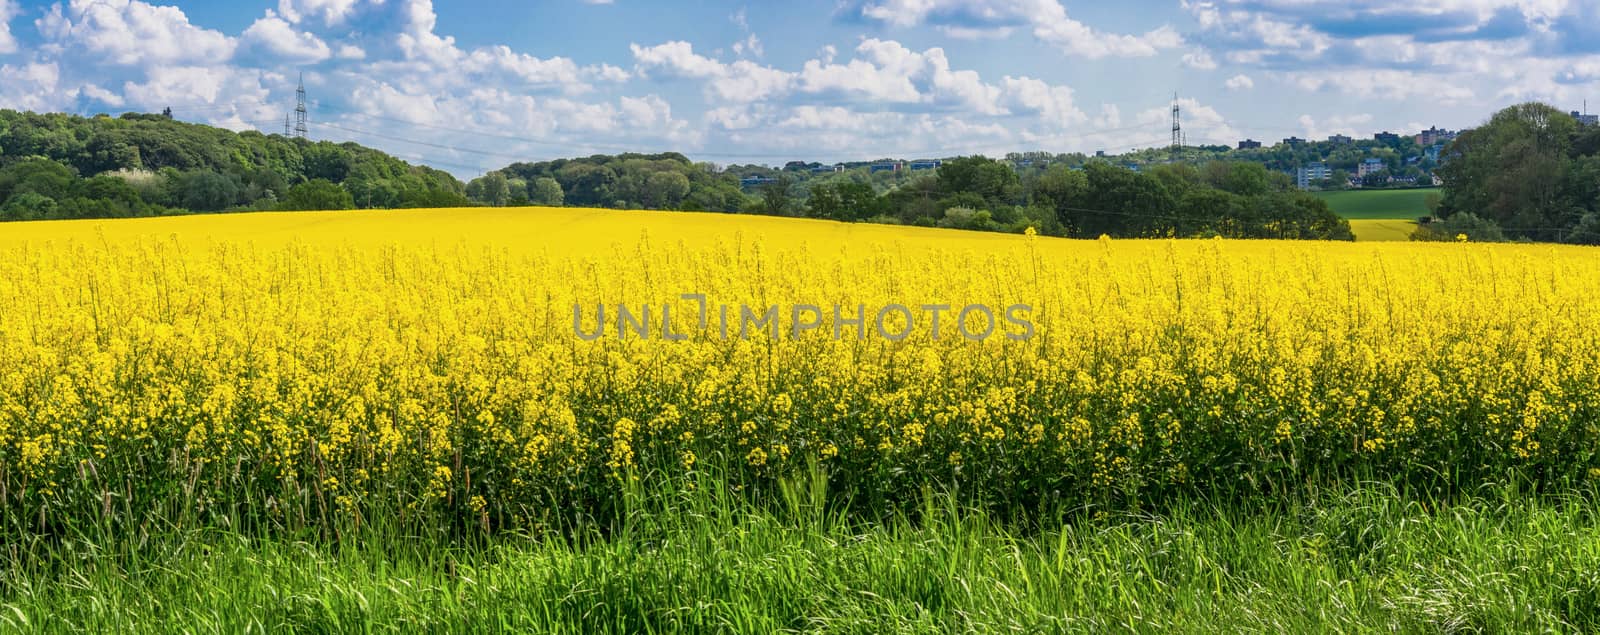 Blooming canola field with blue sky by JFsPic